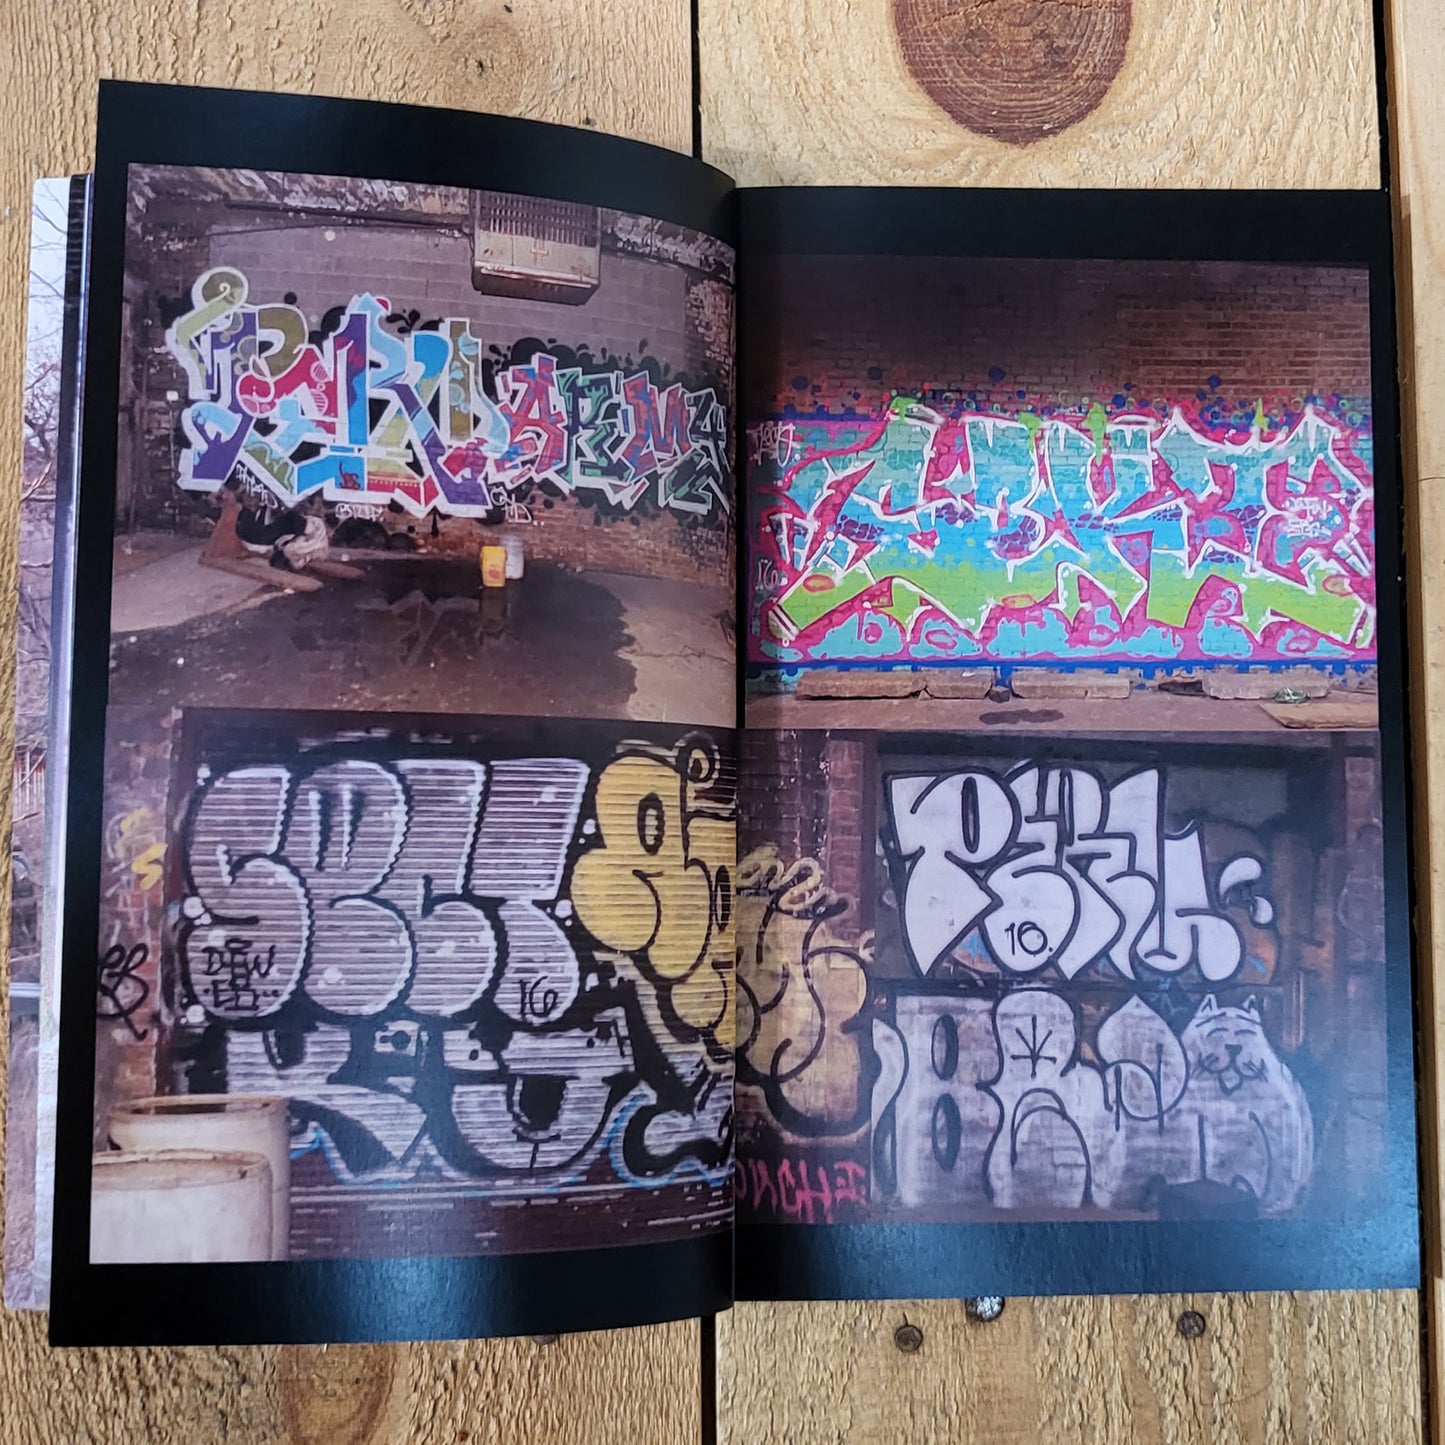 page one of the city limits magazine filled with graffiti